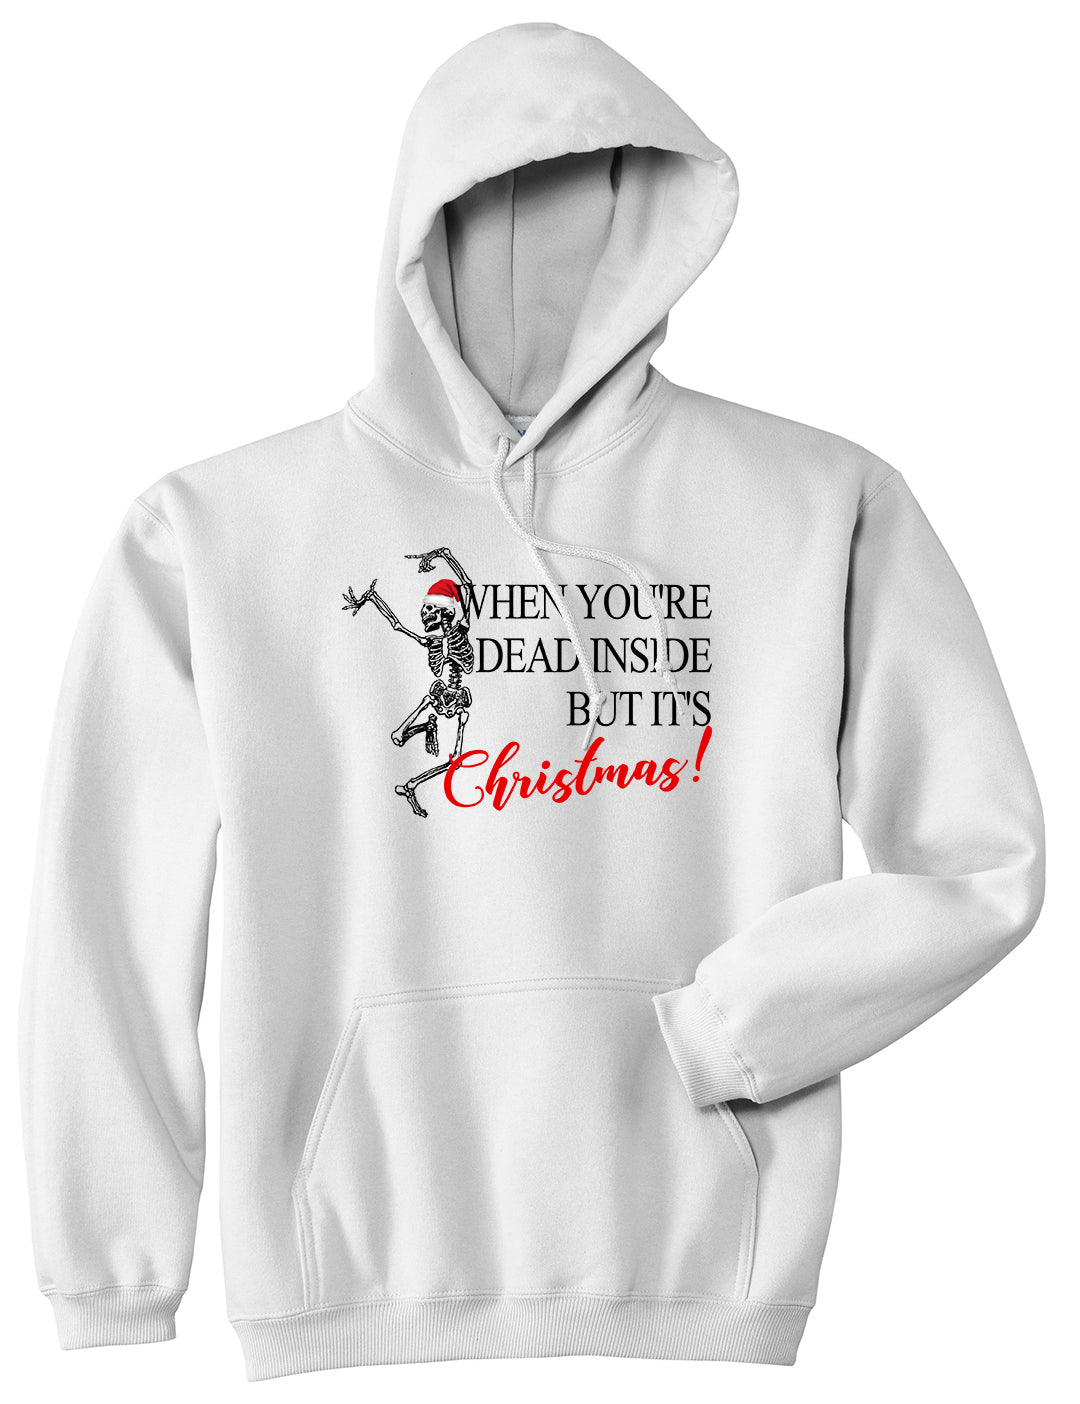 When Youre Dead Inside But Its Christmas White Mens Pullover Hoodie